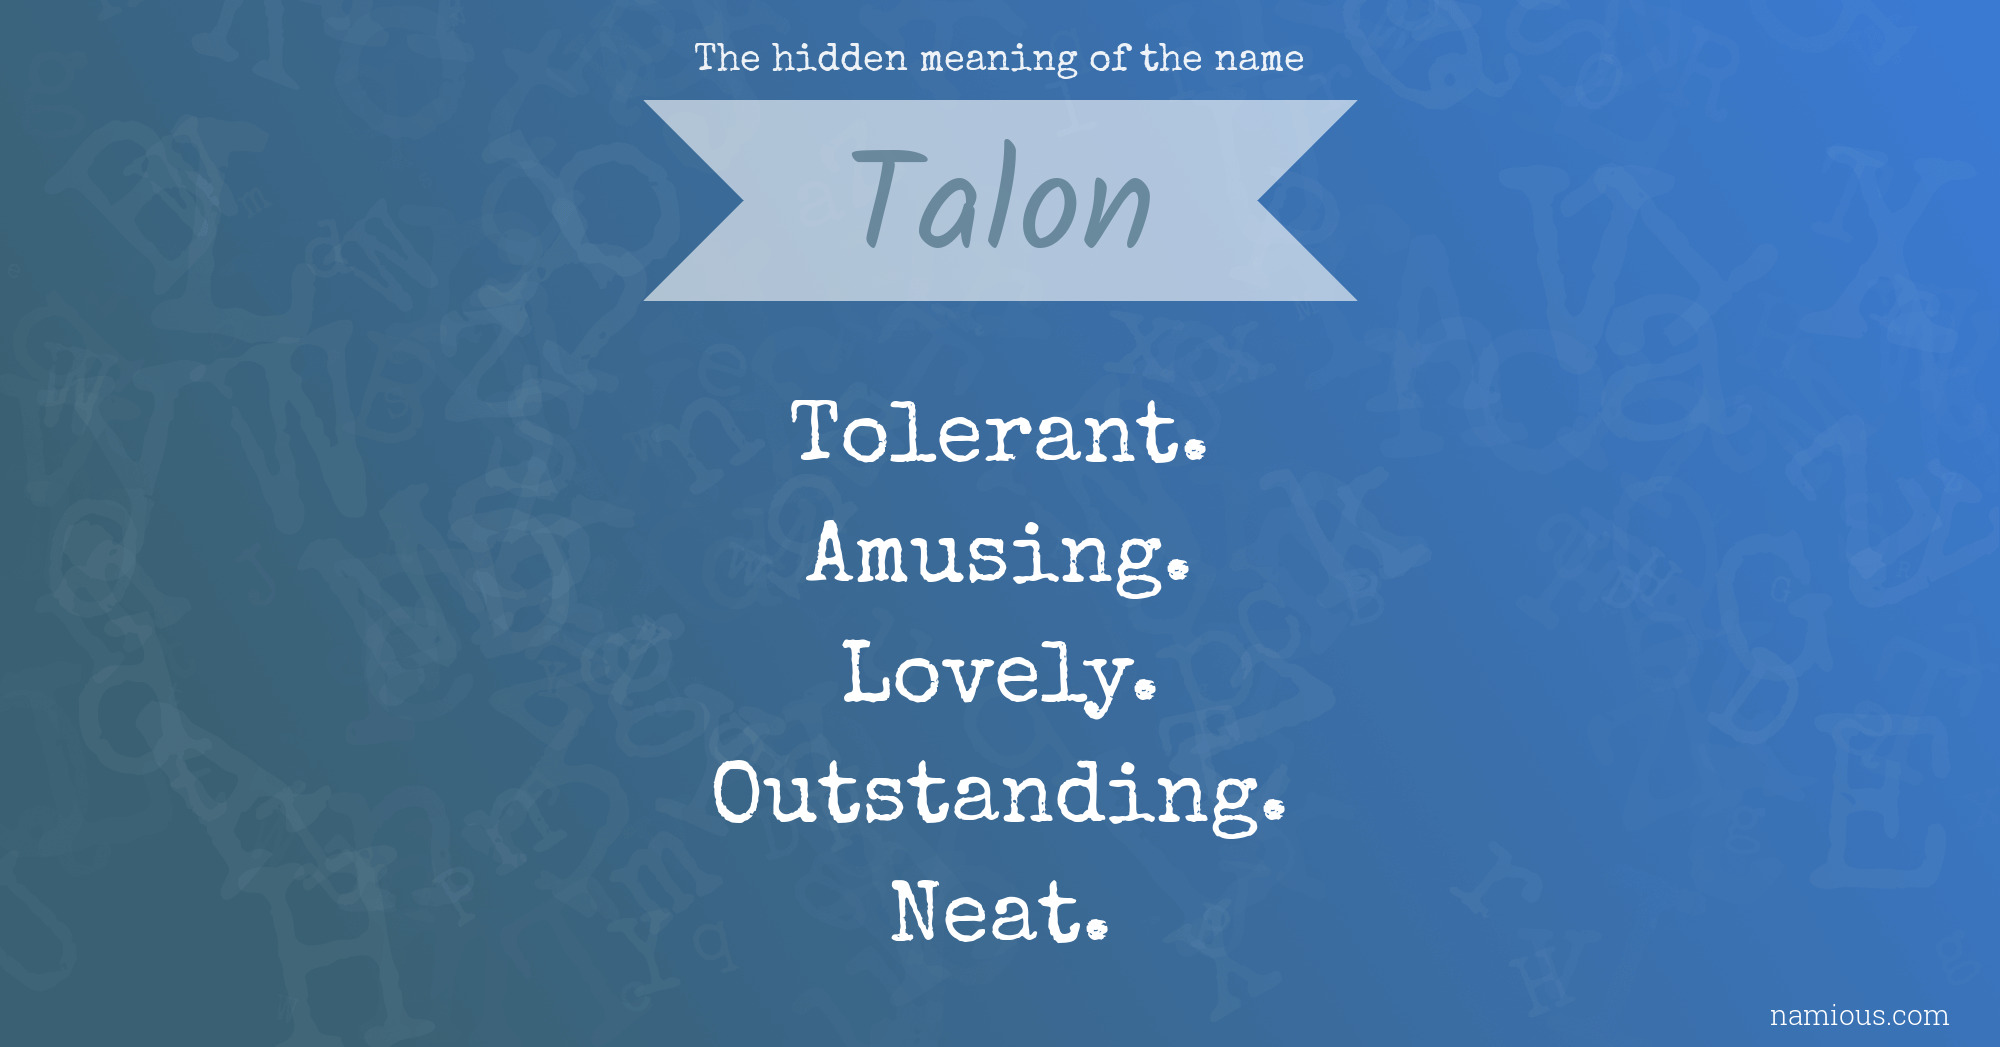 The hidden meaning of the name Talon